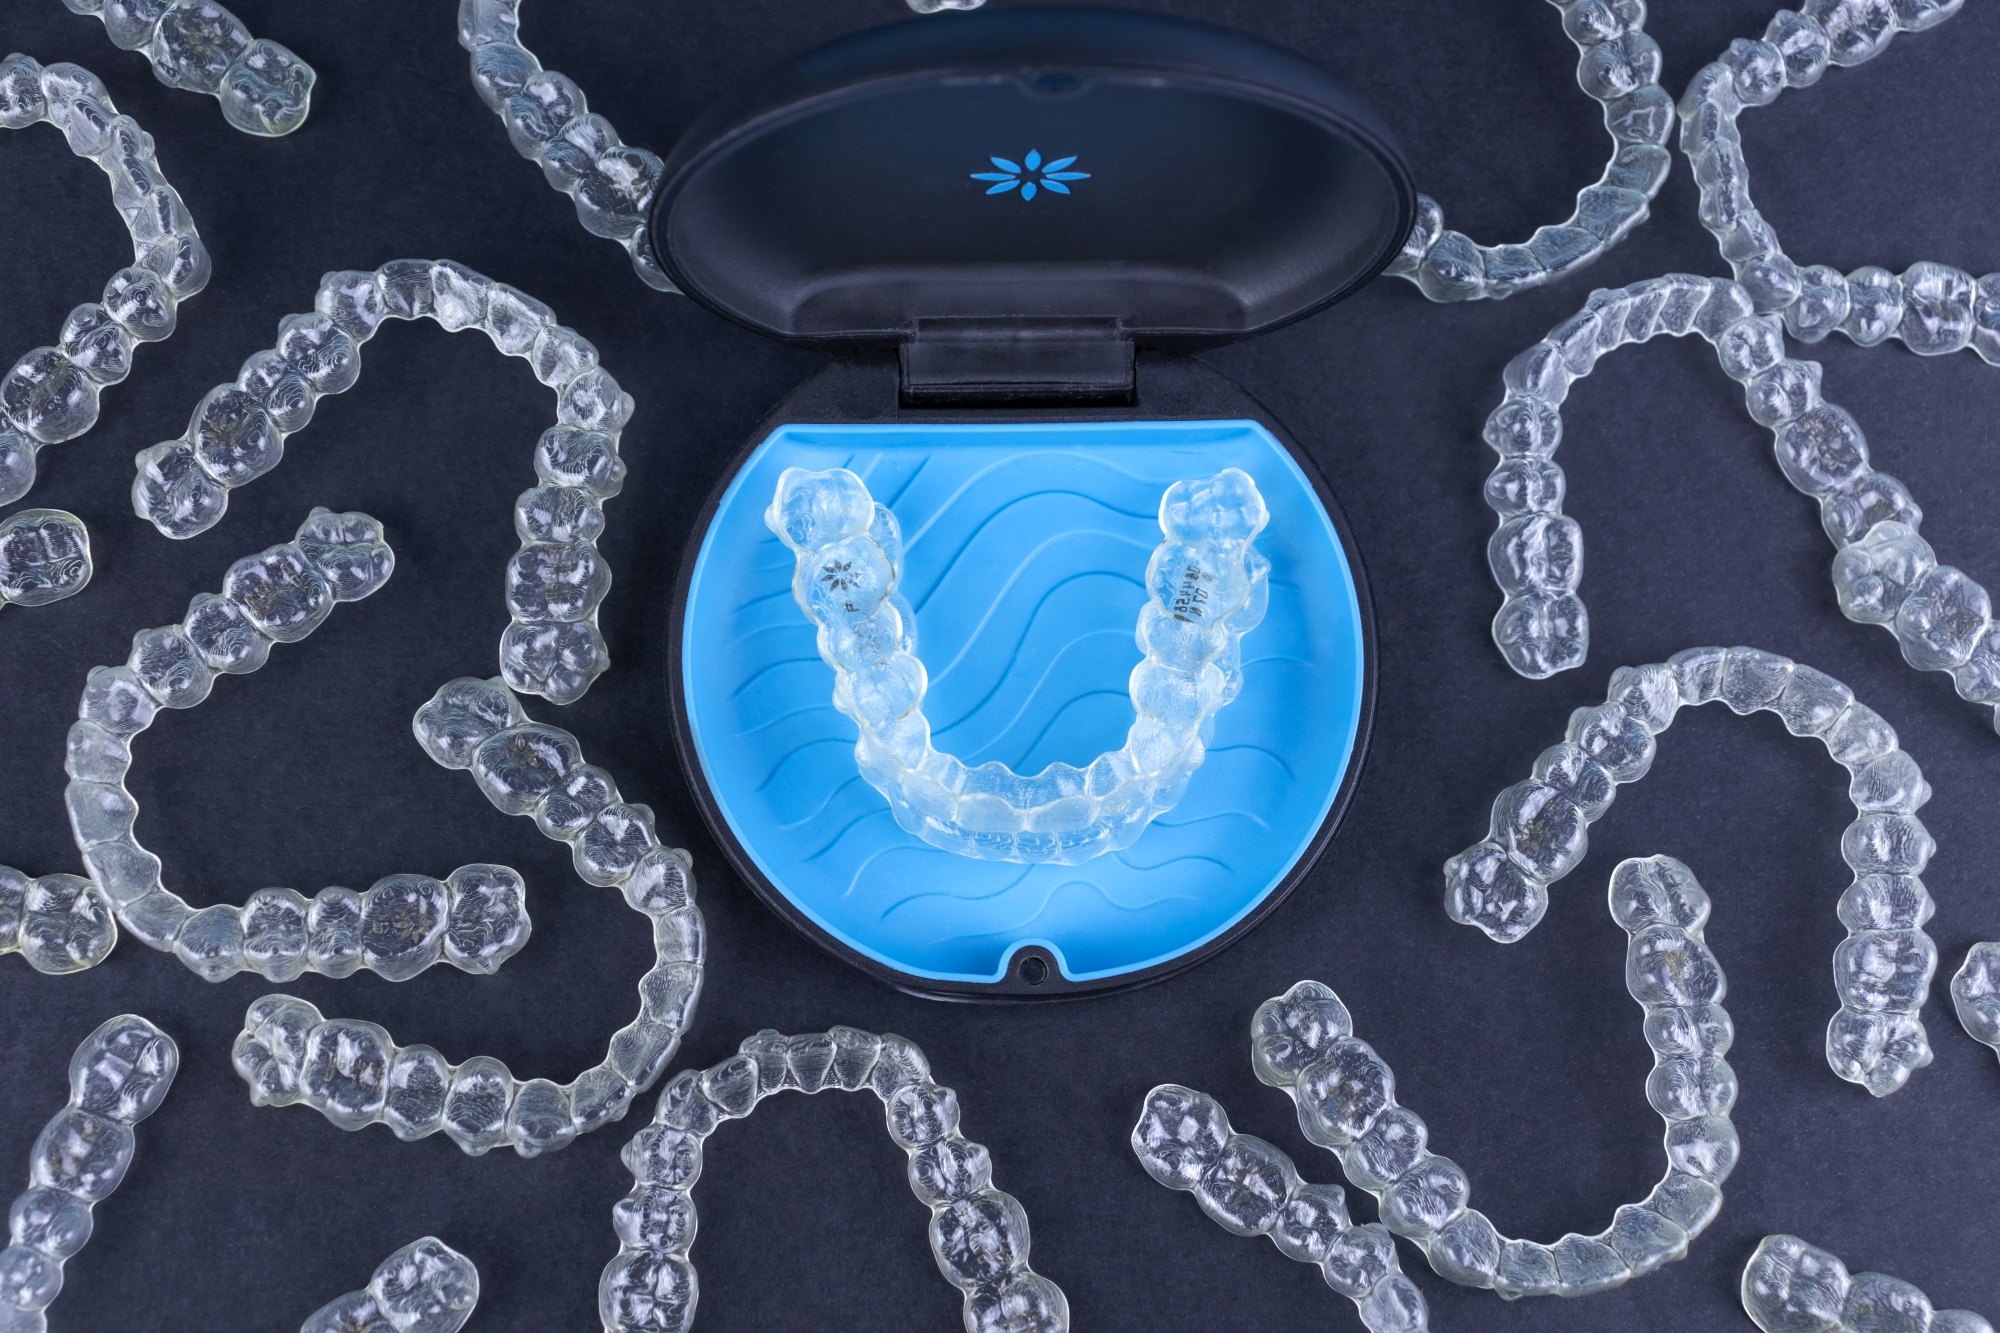 Invisalign Maker's Ex-Vice President Accused of Insider Trading